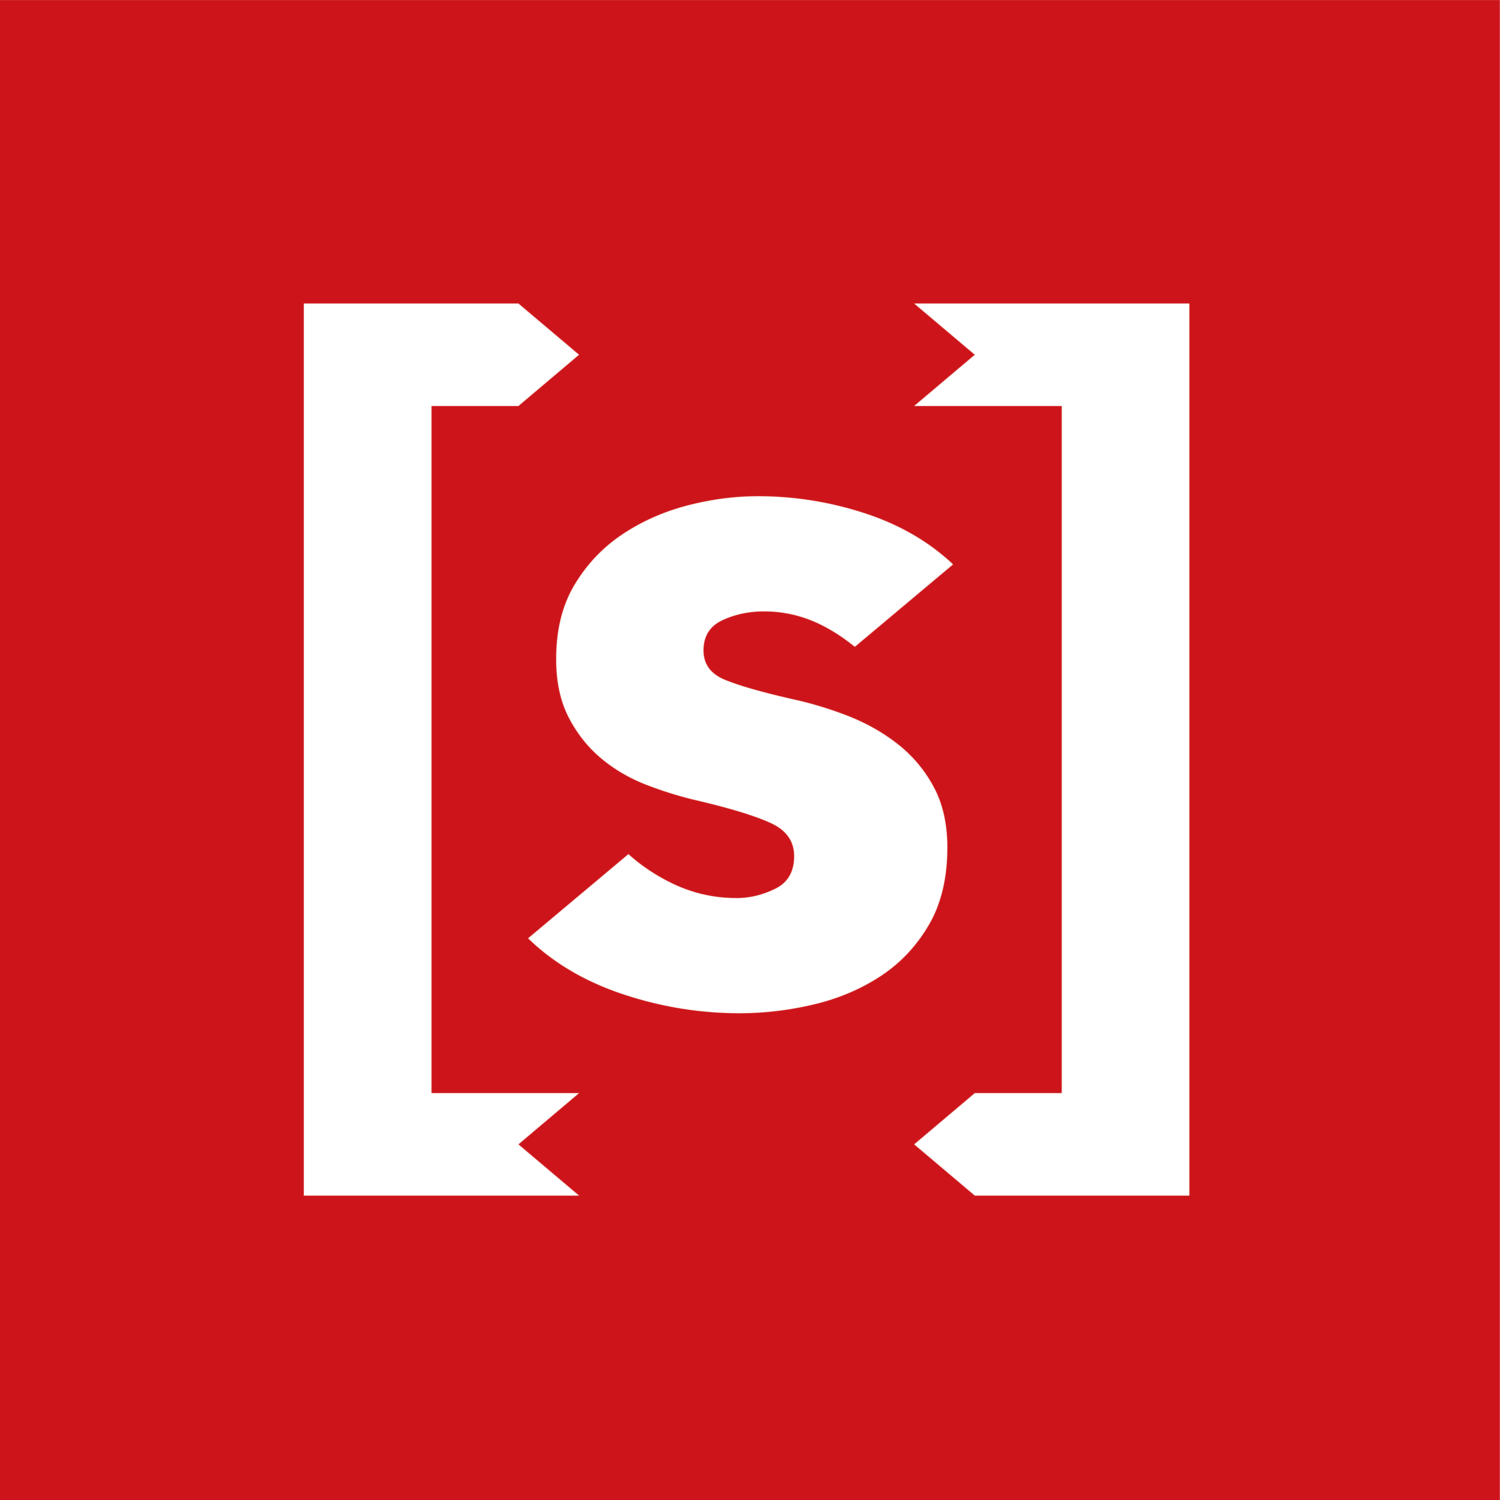 Red and White S Logo - Brand Guidelines — Chip[s] Board®